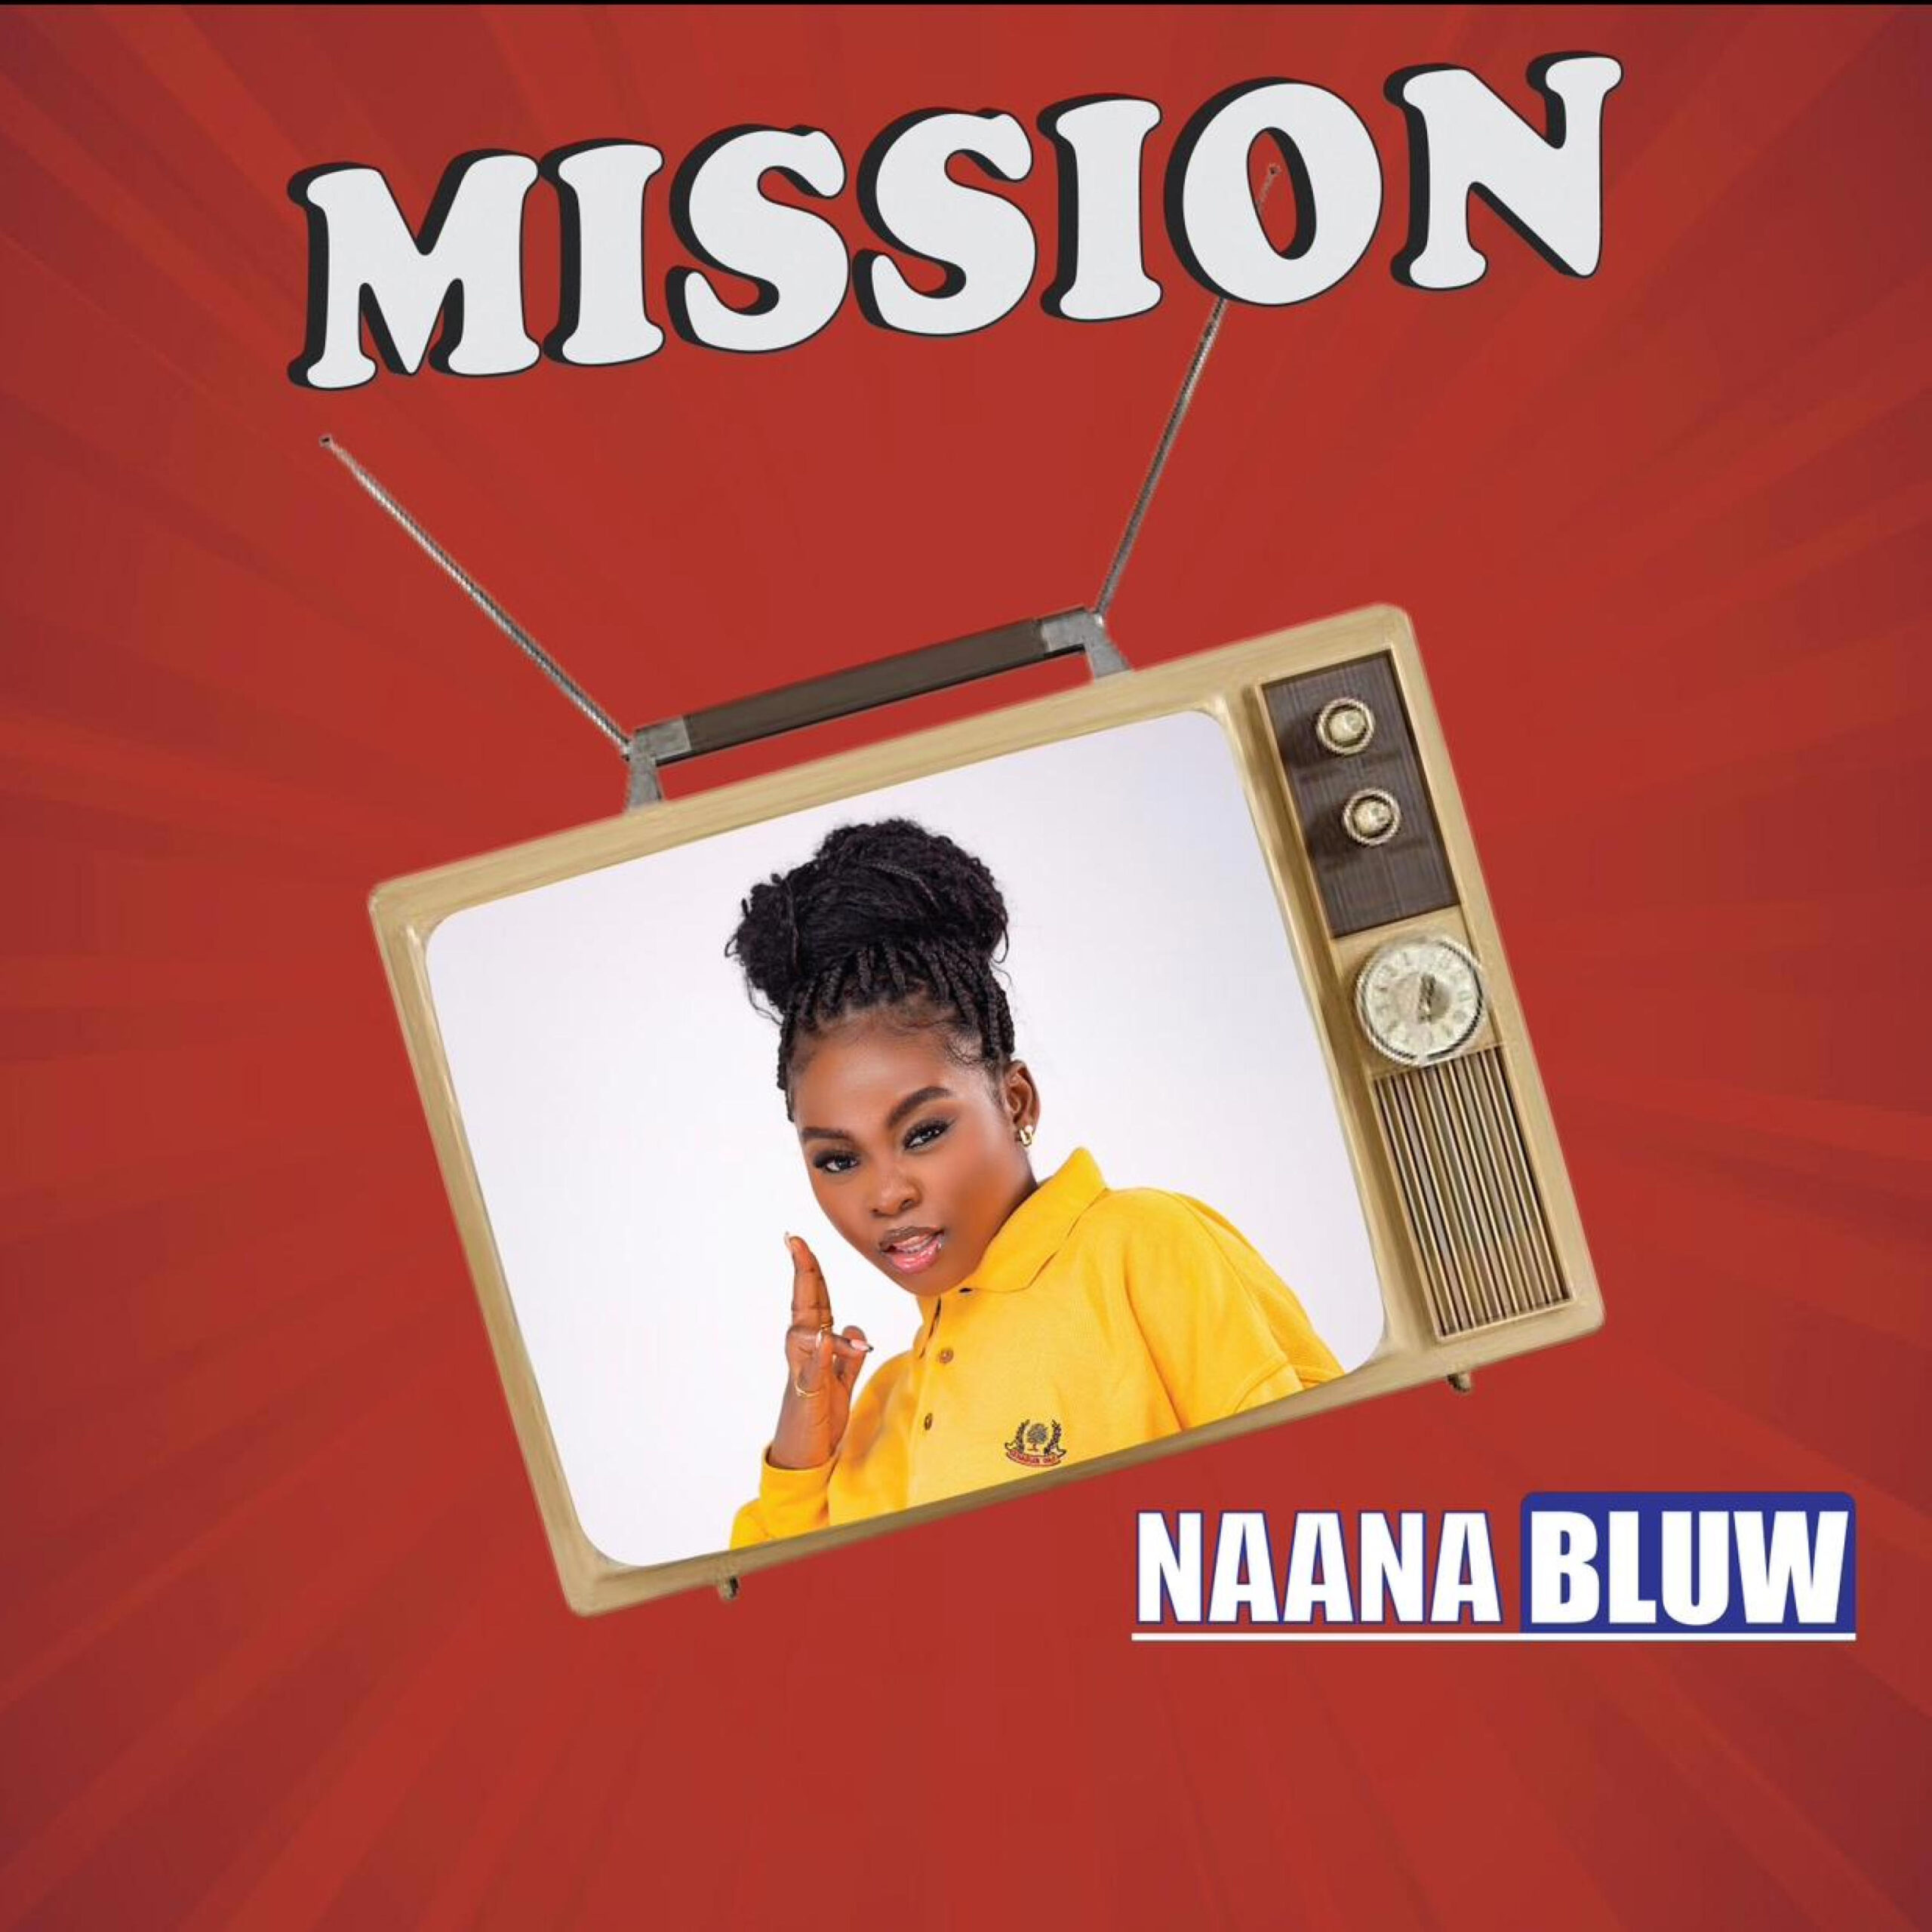 Mission by Naana Bluw